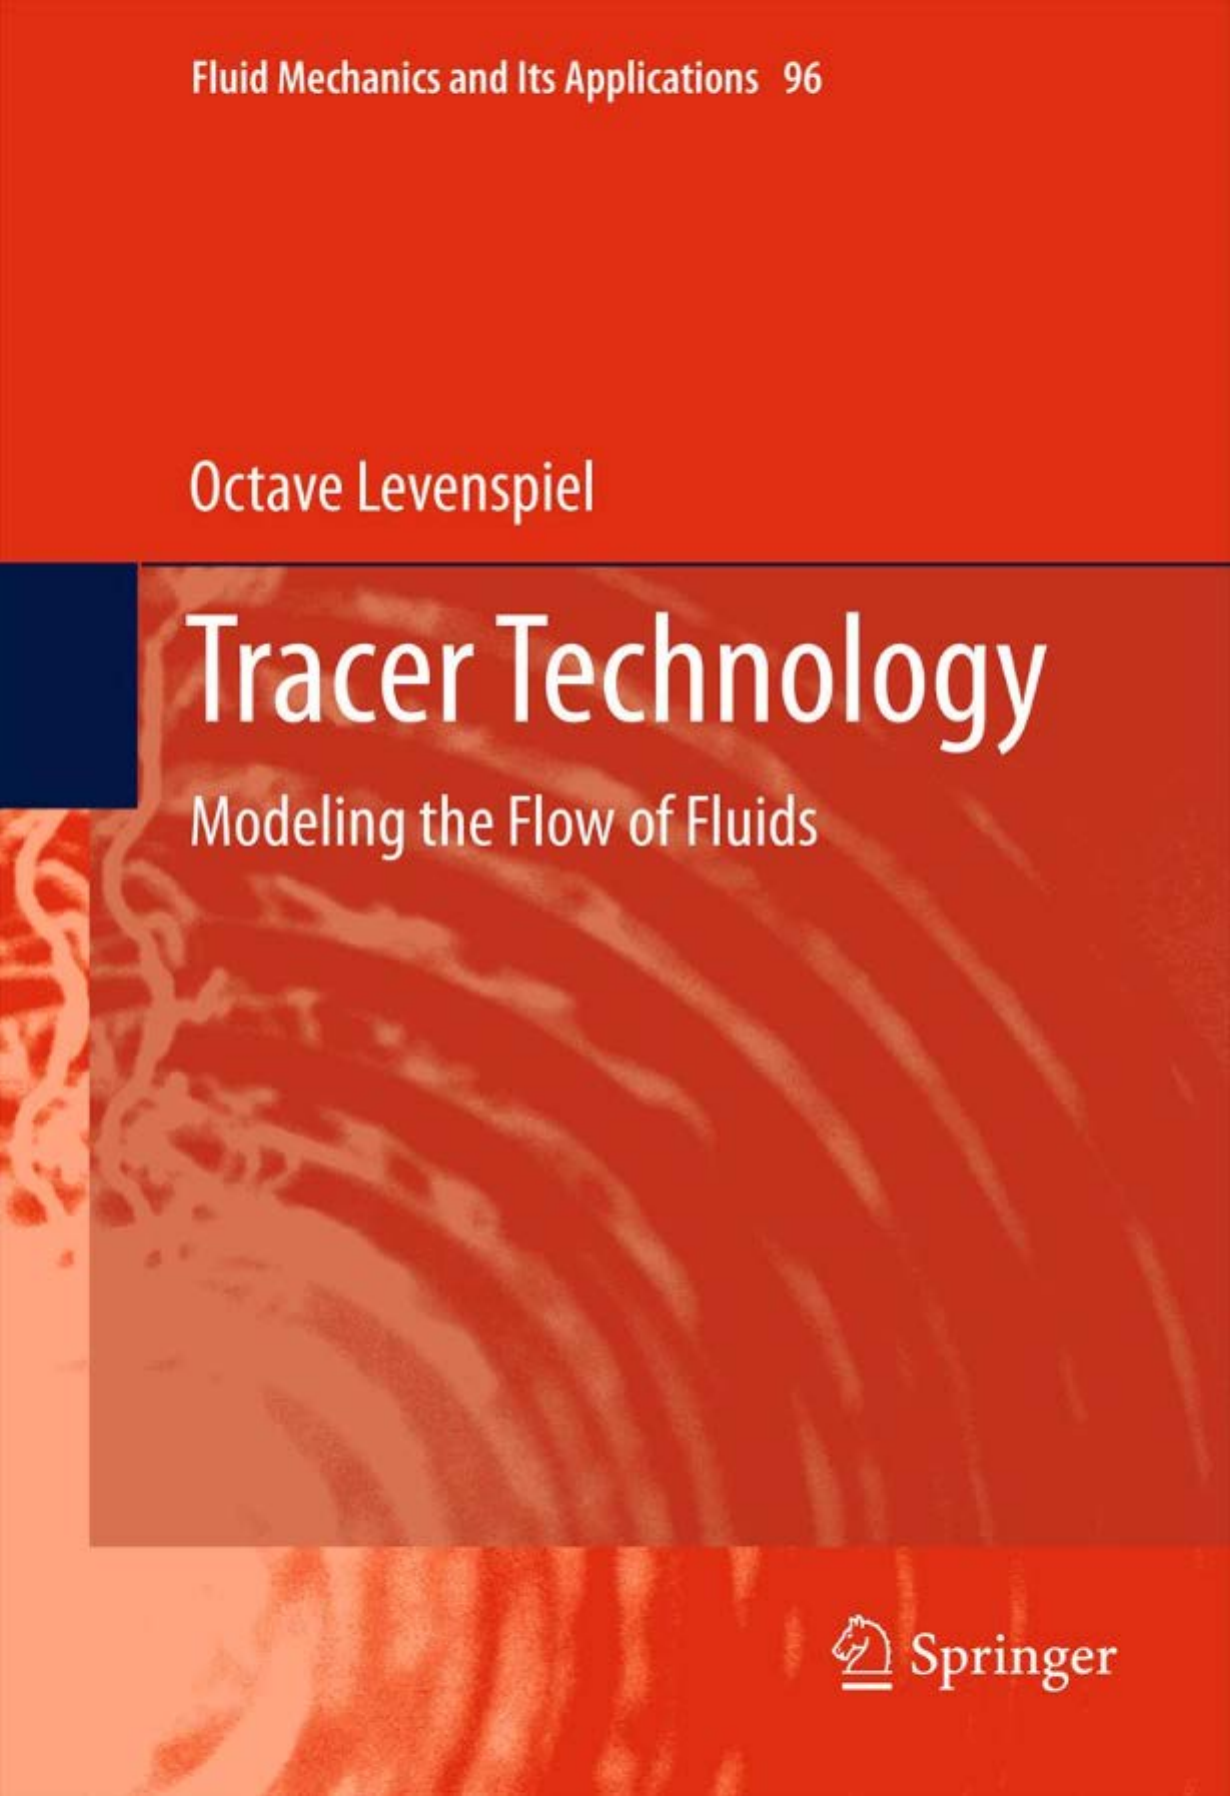 Fluid Mechanics And Its Applications 96 Octave Levenspiel Auth Tracer Technology Modeling The Flow Of Fluids Springer Verlag New York 12 Operacoes Unitarias I 13